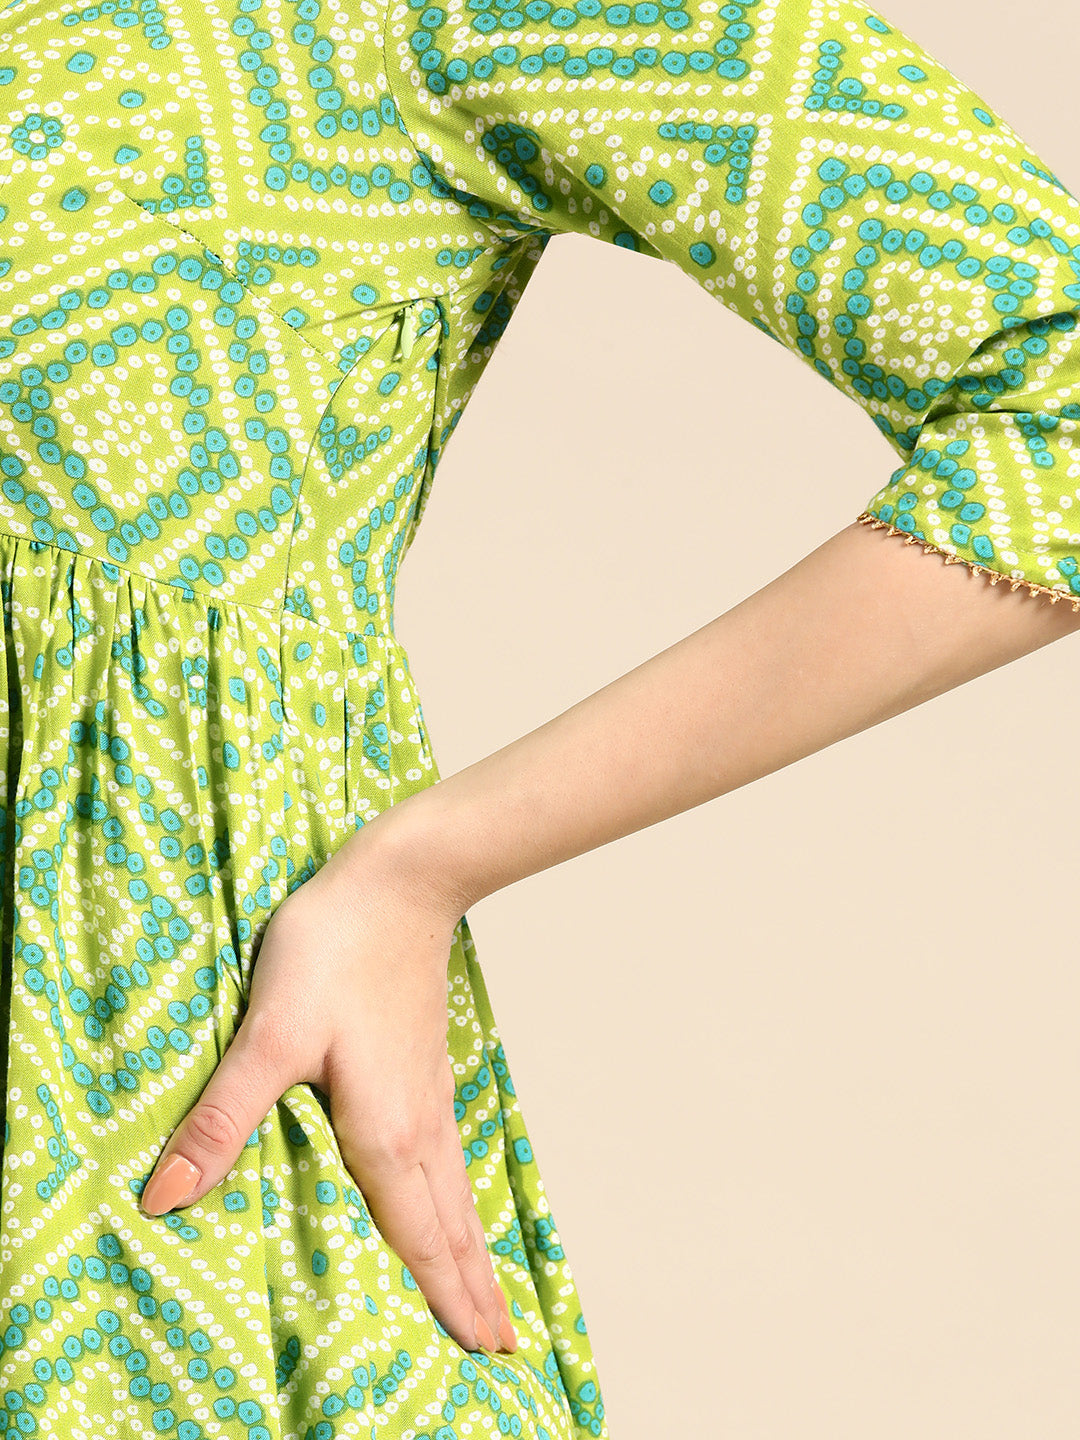 Anghrakha style Kurta with palazzo in Lime Green